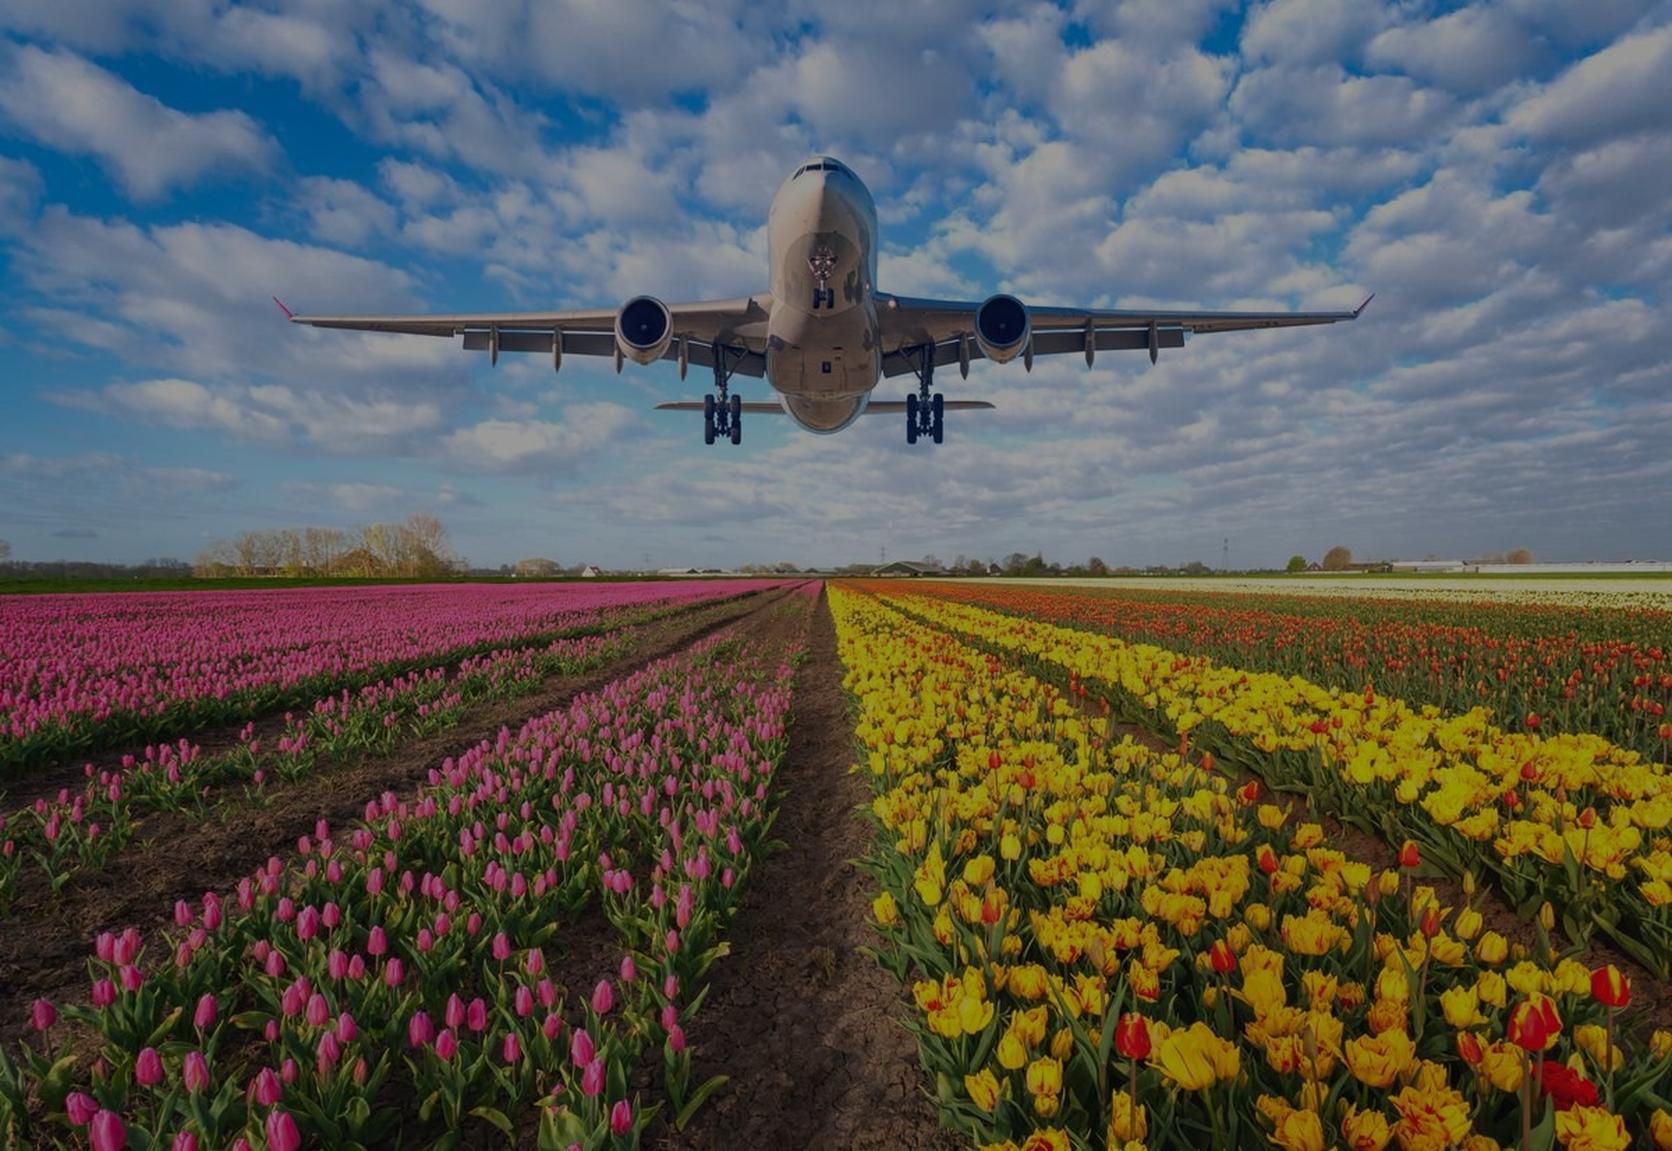 aeroplane-flying-above-fields-of-flowers